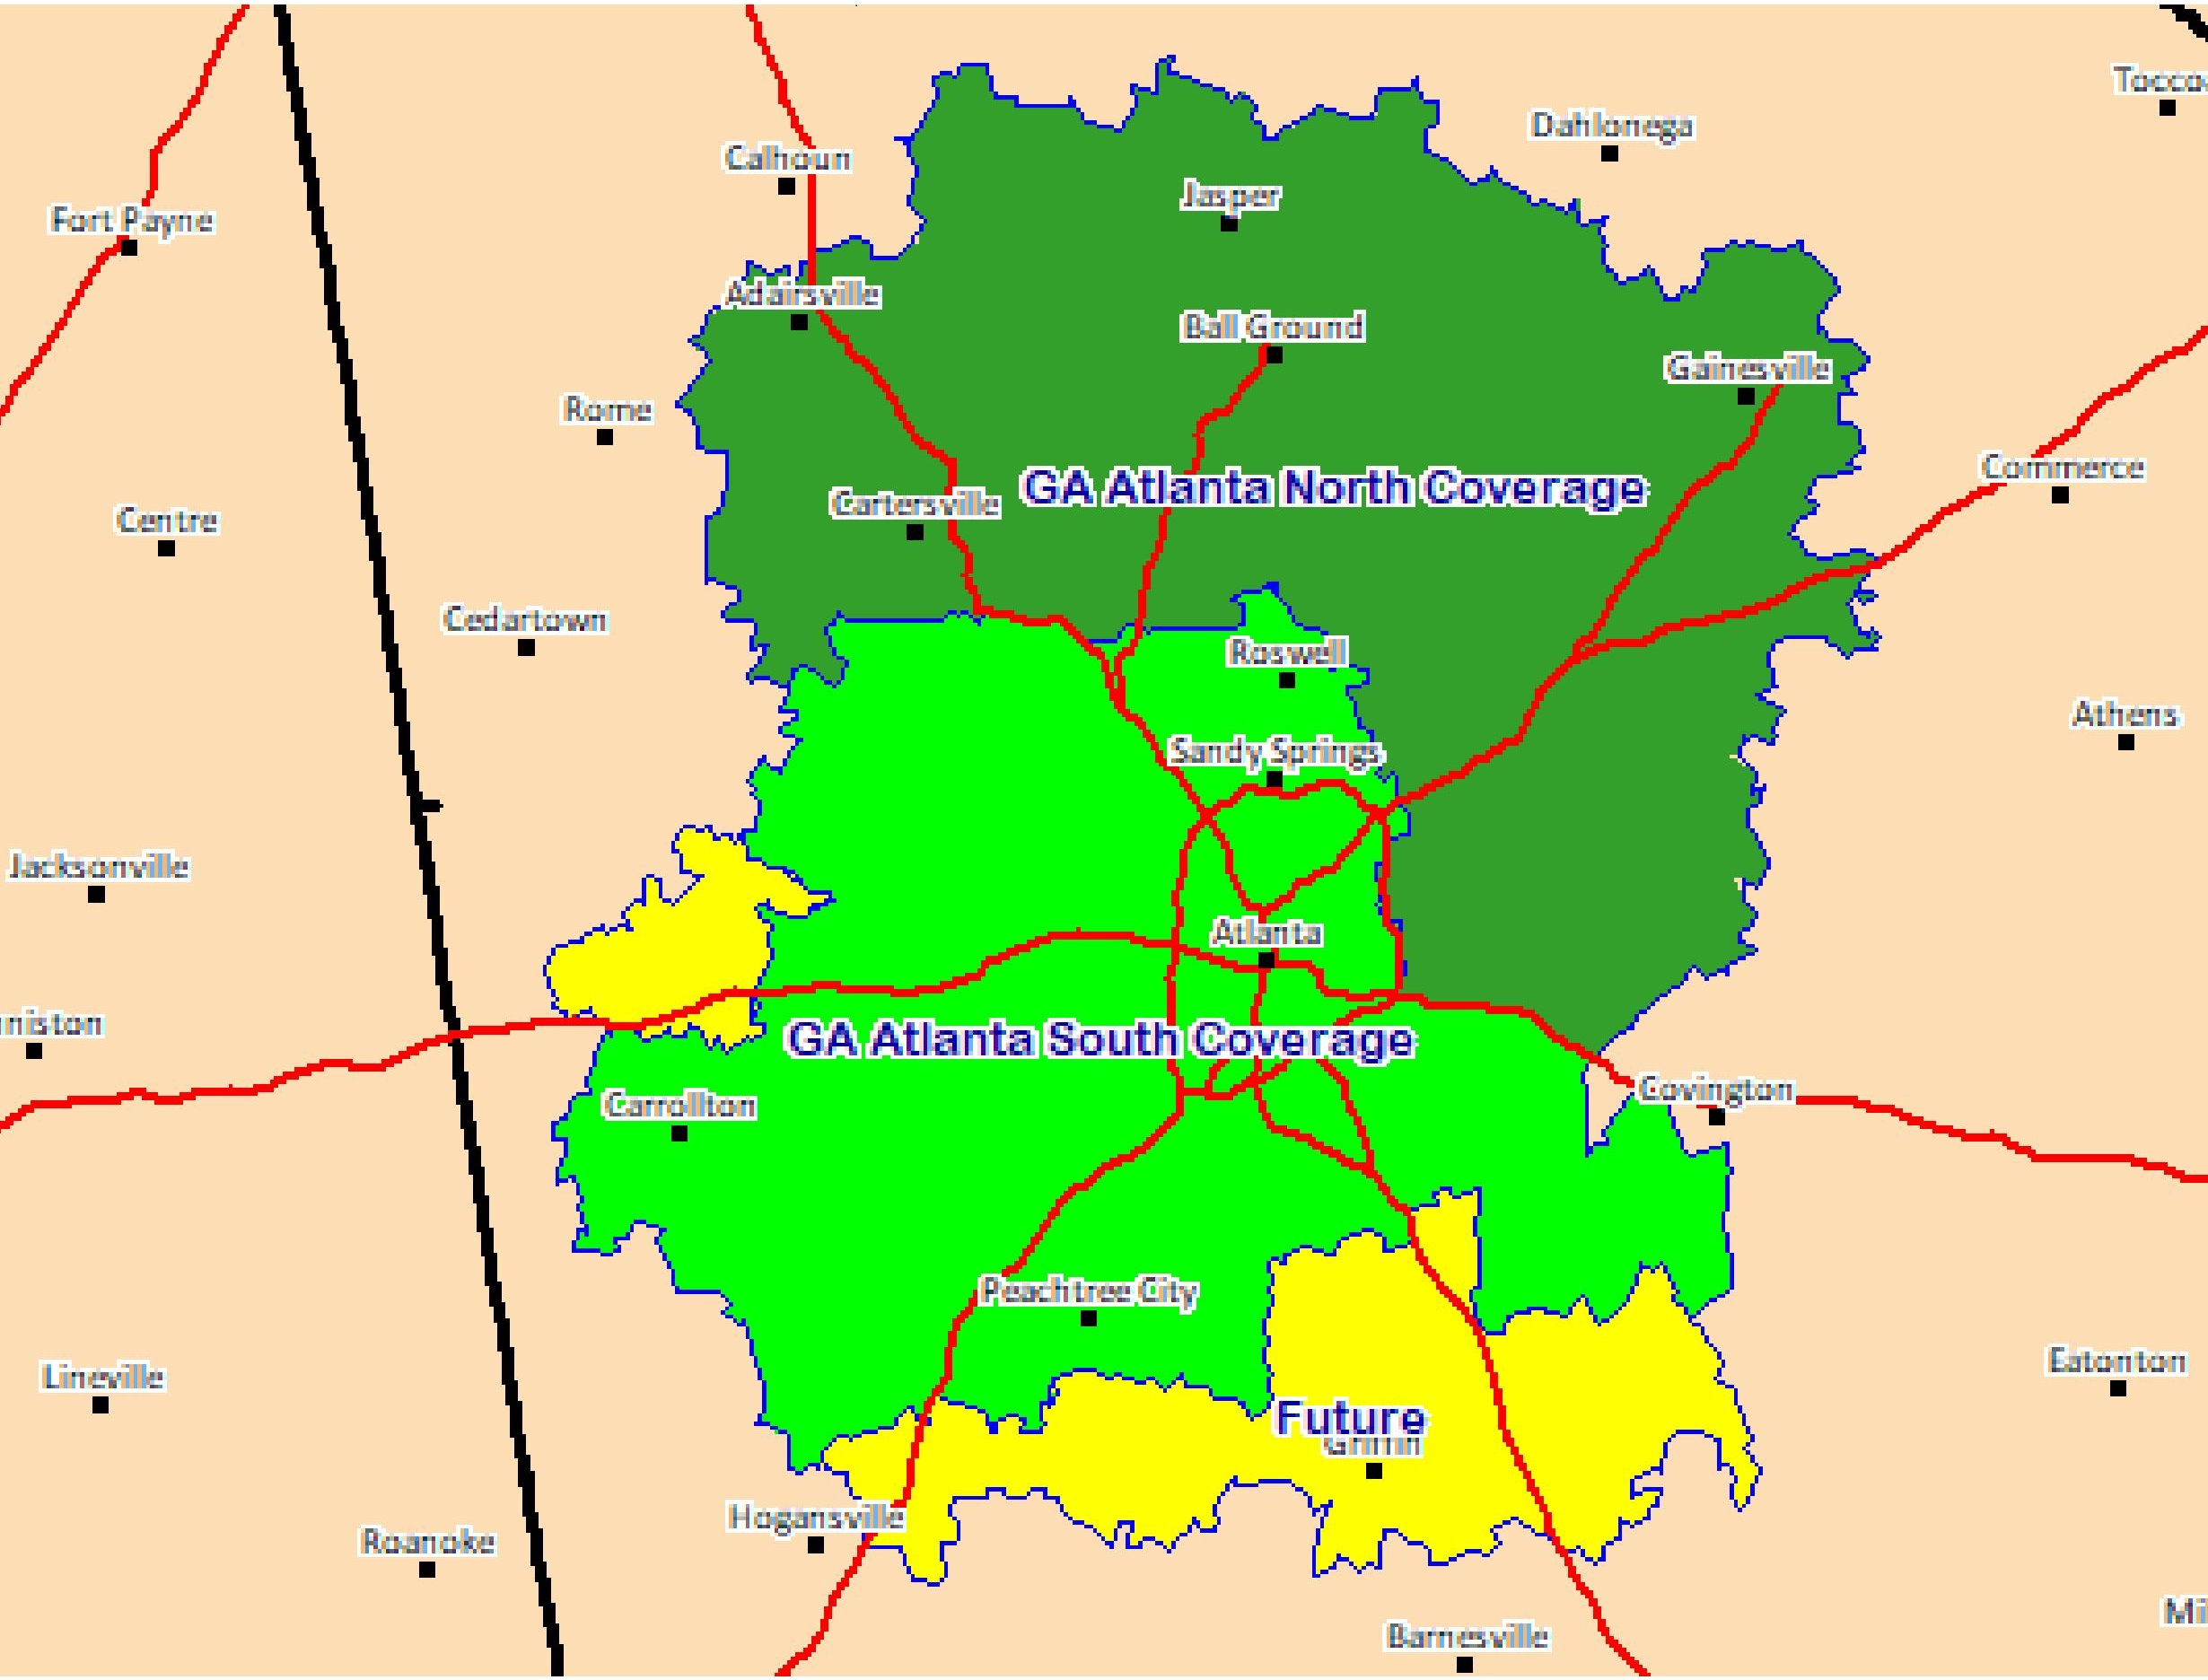 Paulding County Service Areas